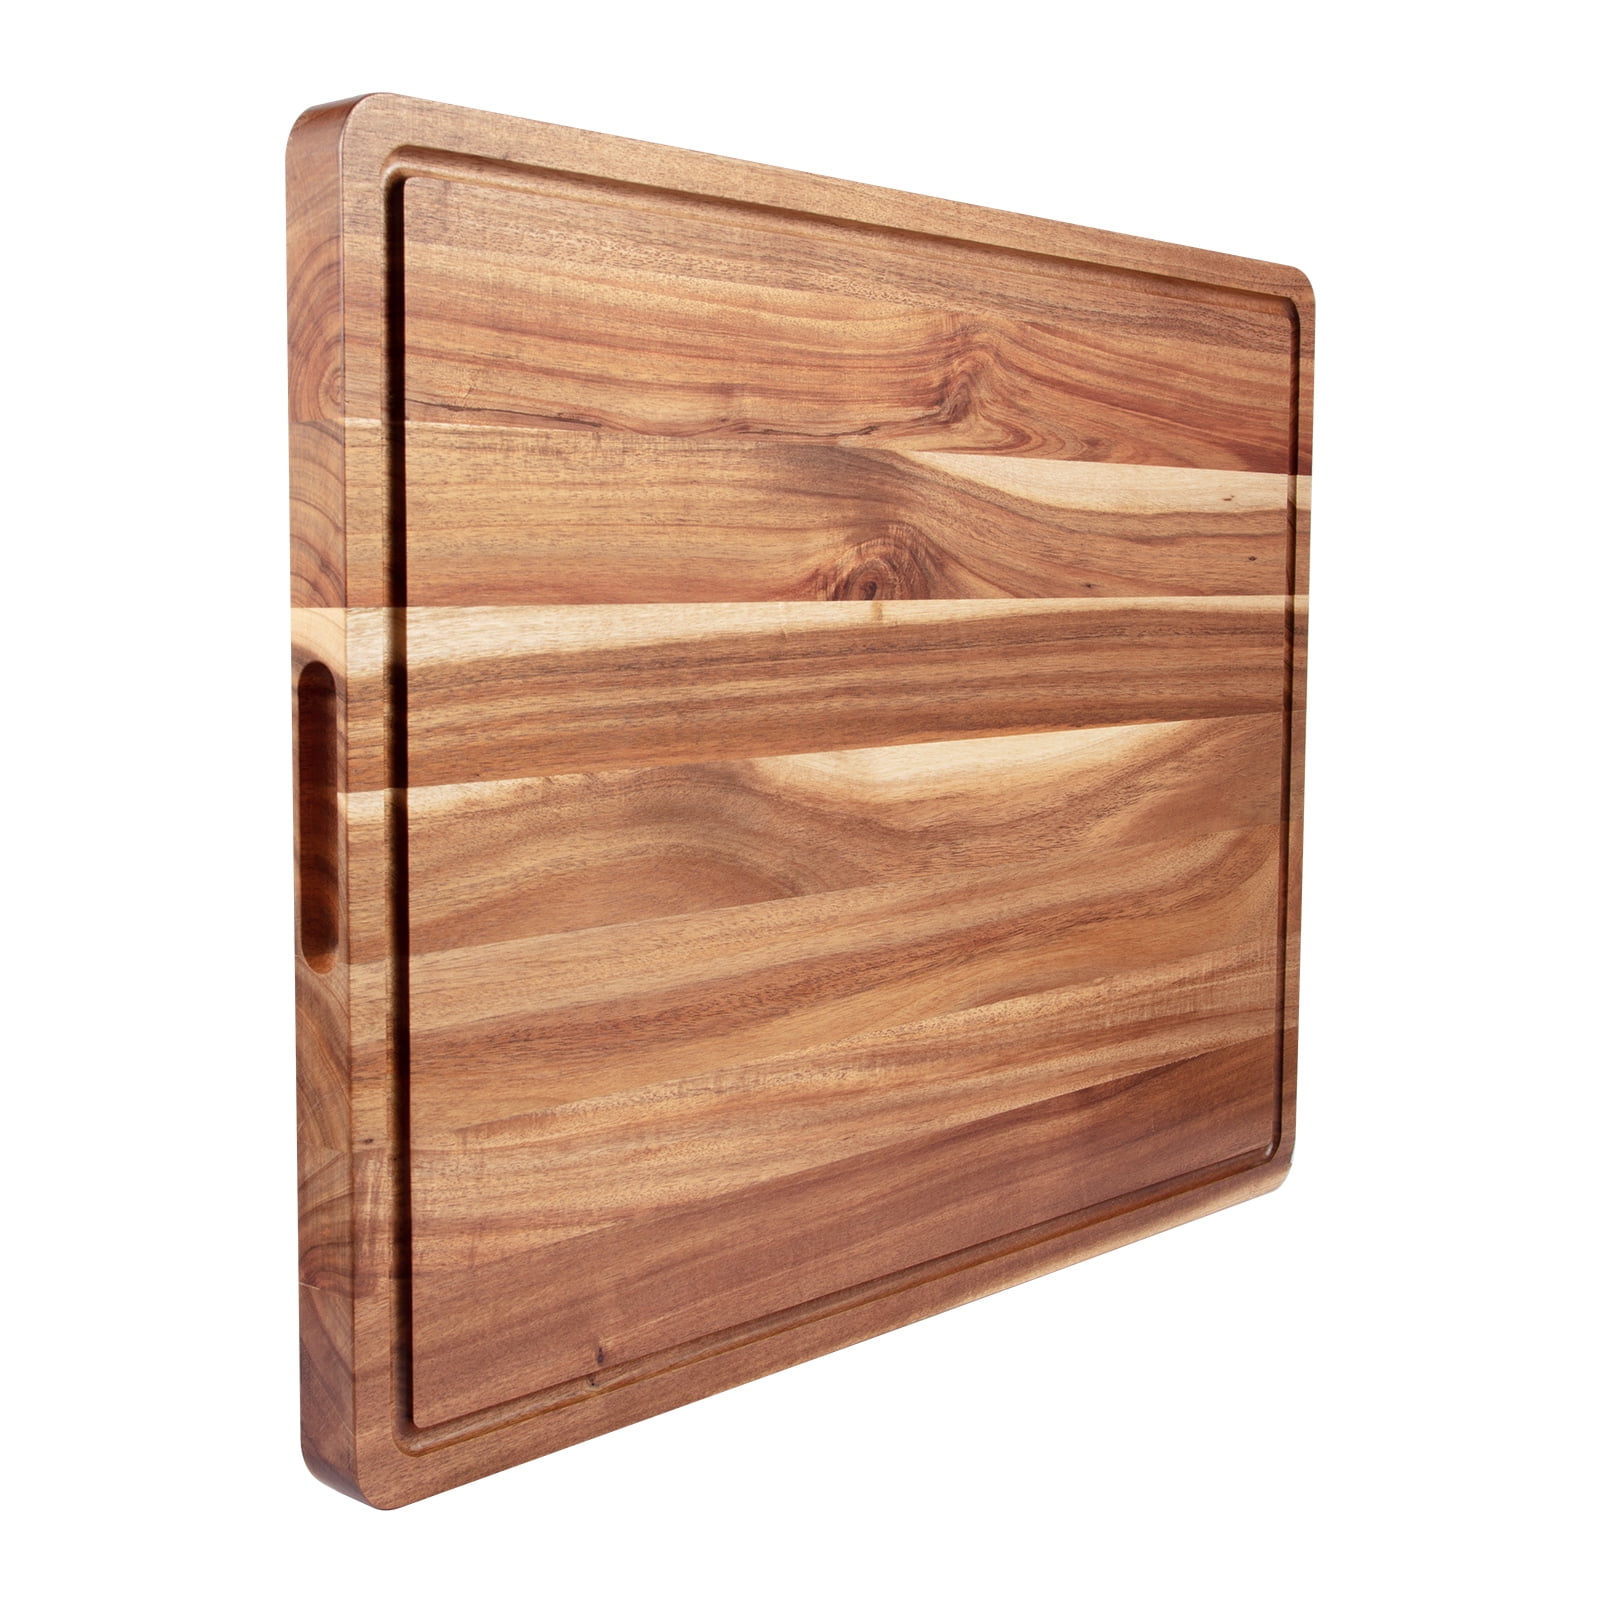 Khaya Wooden Cutting Board for Kitchen with Handle - 15.7x5.9 - Smal —  LUA' Decor